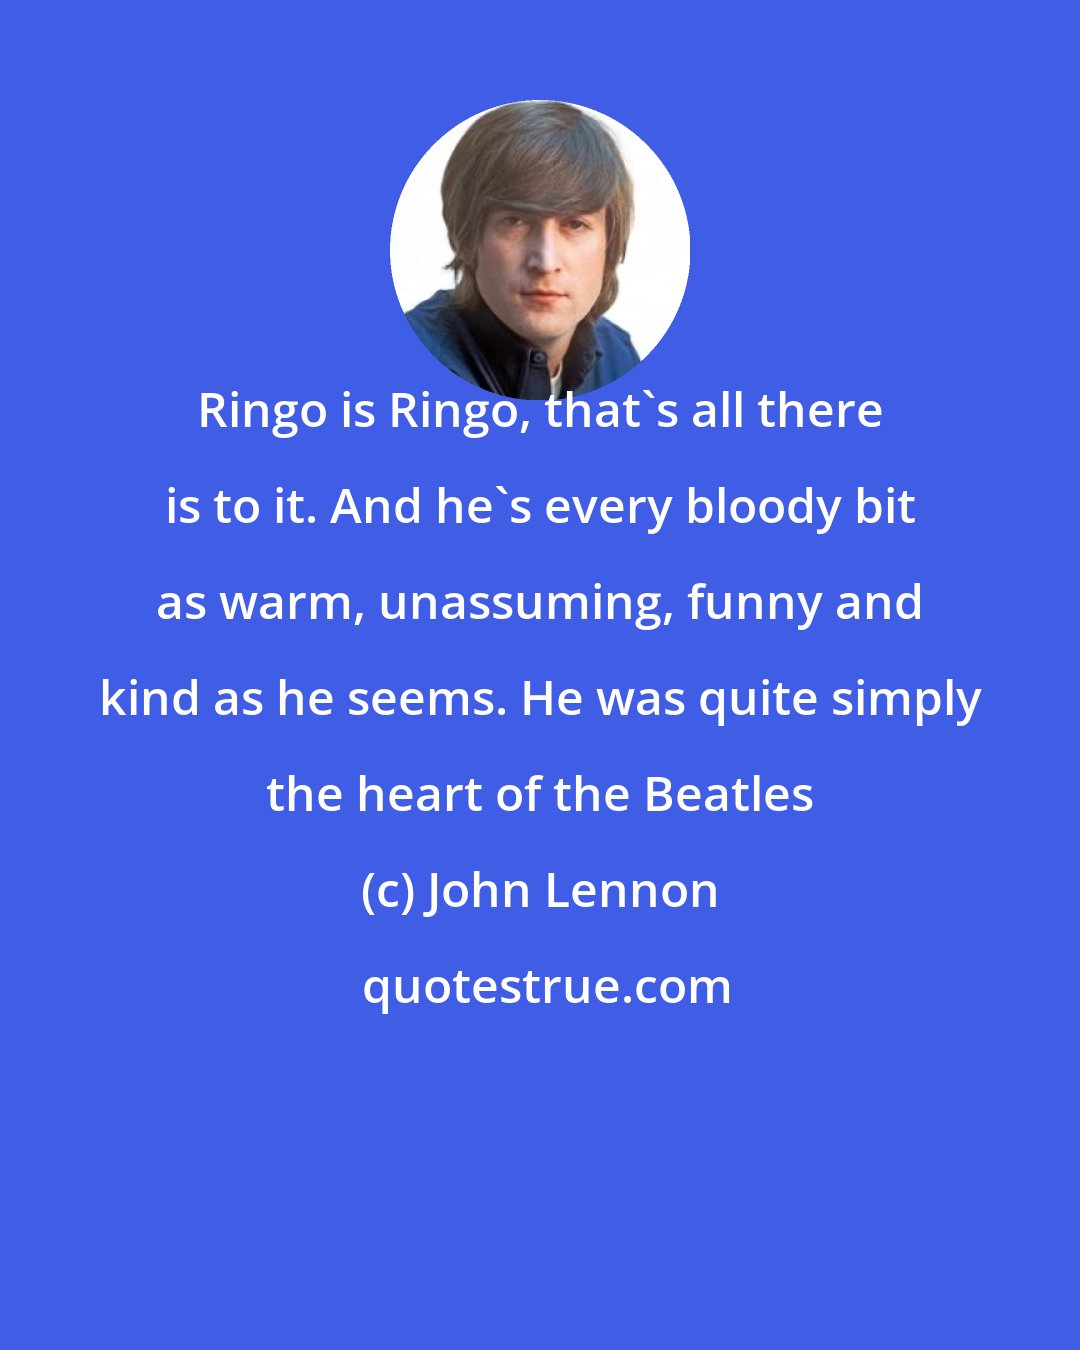 John Lennon: Ringo is Ringo, that's all there is to it. And he's every bloody bit as warm, unassuming, funny and kind as he seems. He was quite simply the heart of the Beatles